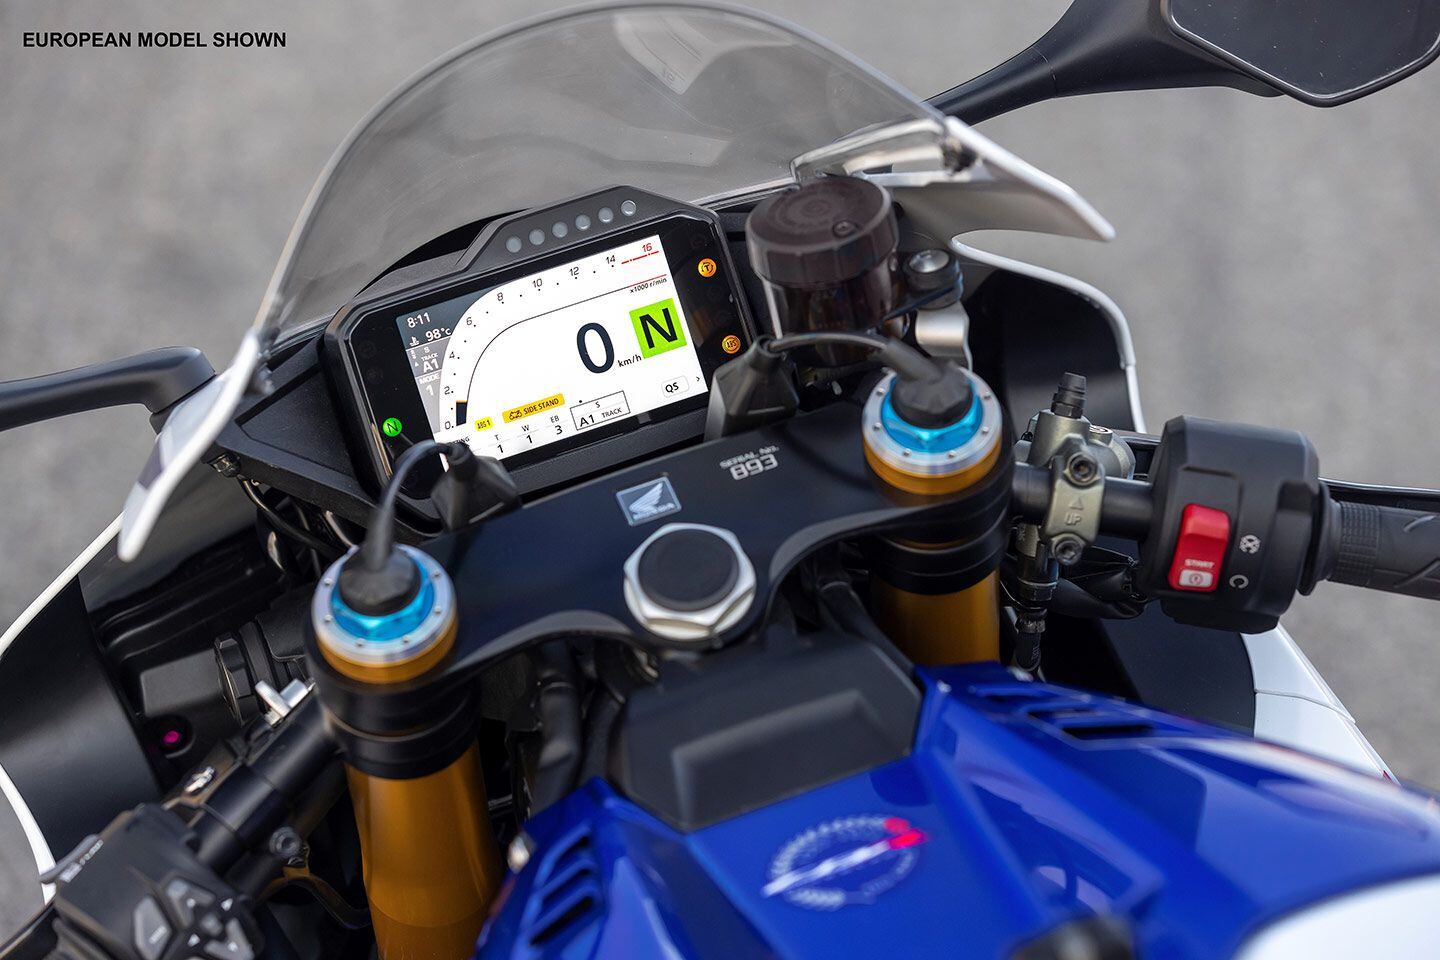 The ’Blade is equipped with a 5-inch TFT dash, and host of electronic rider aids.